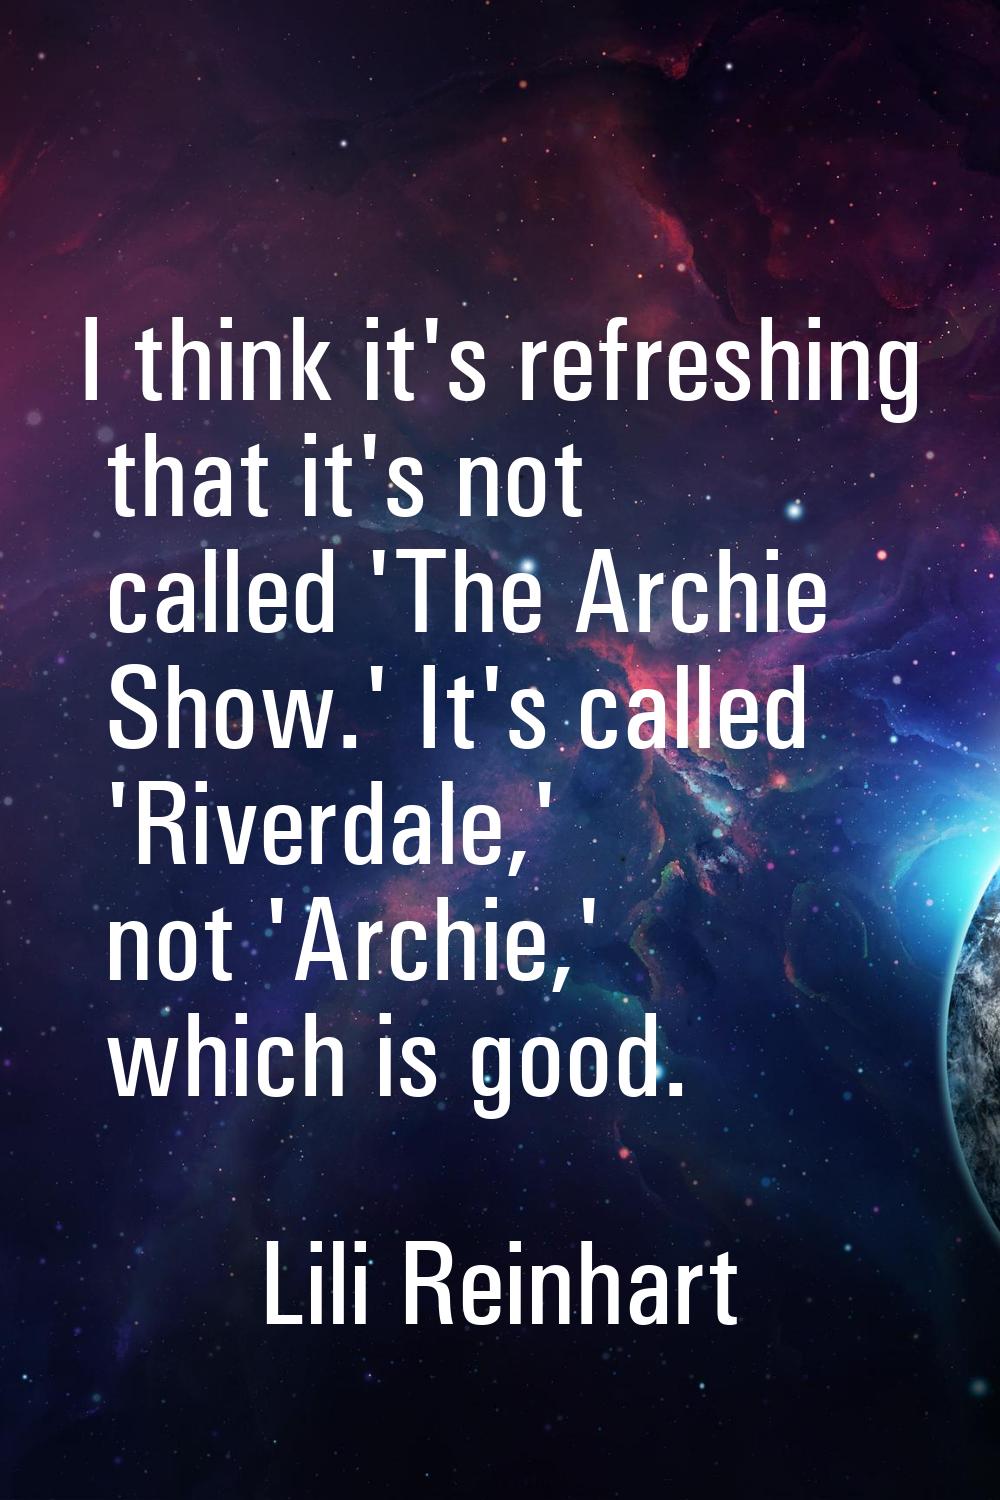 I think it's refreshing that it's not called 'The Archie Show.' It's called 'Riverdale,' not 'Archi